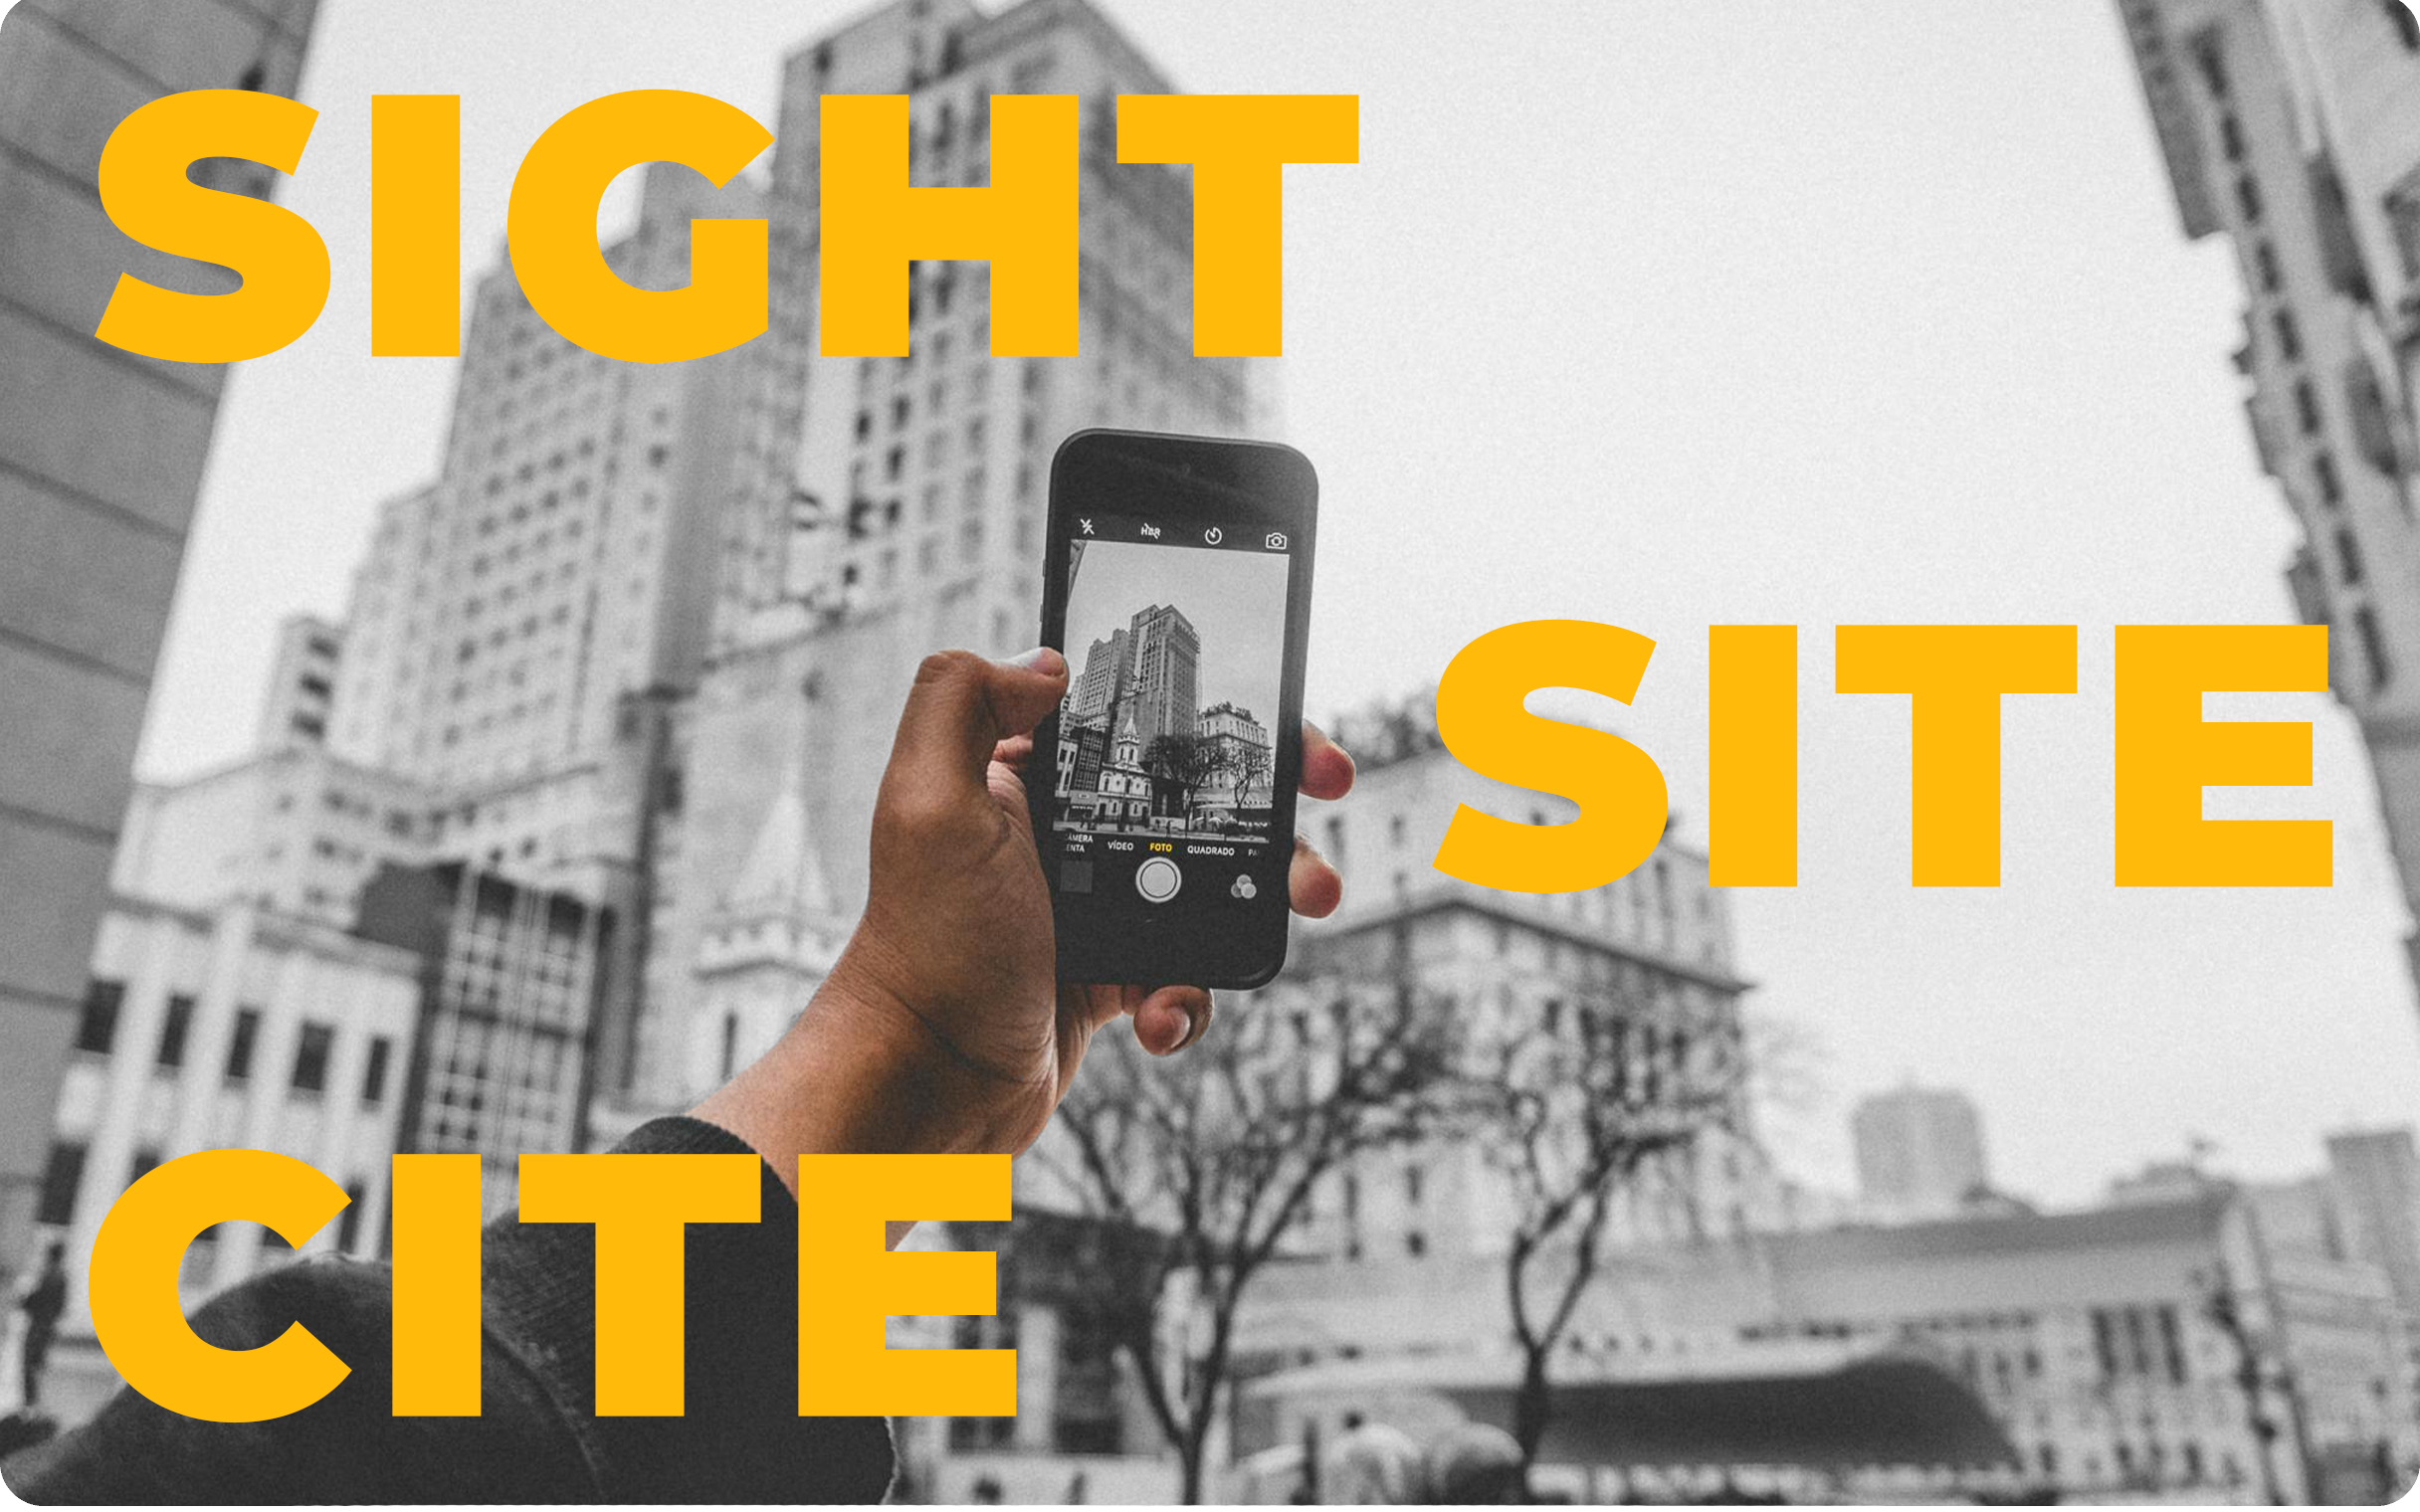 Understanding "cite," "site," and "sight"